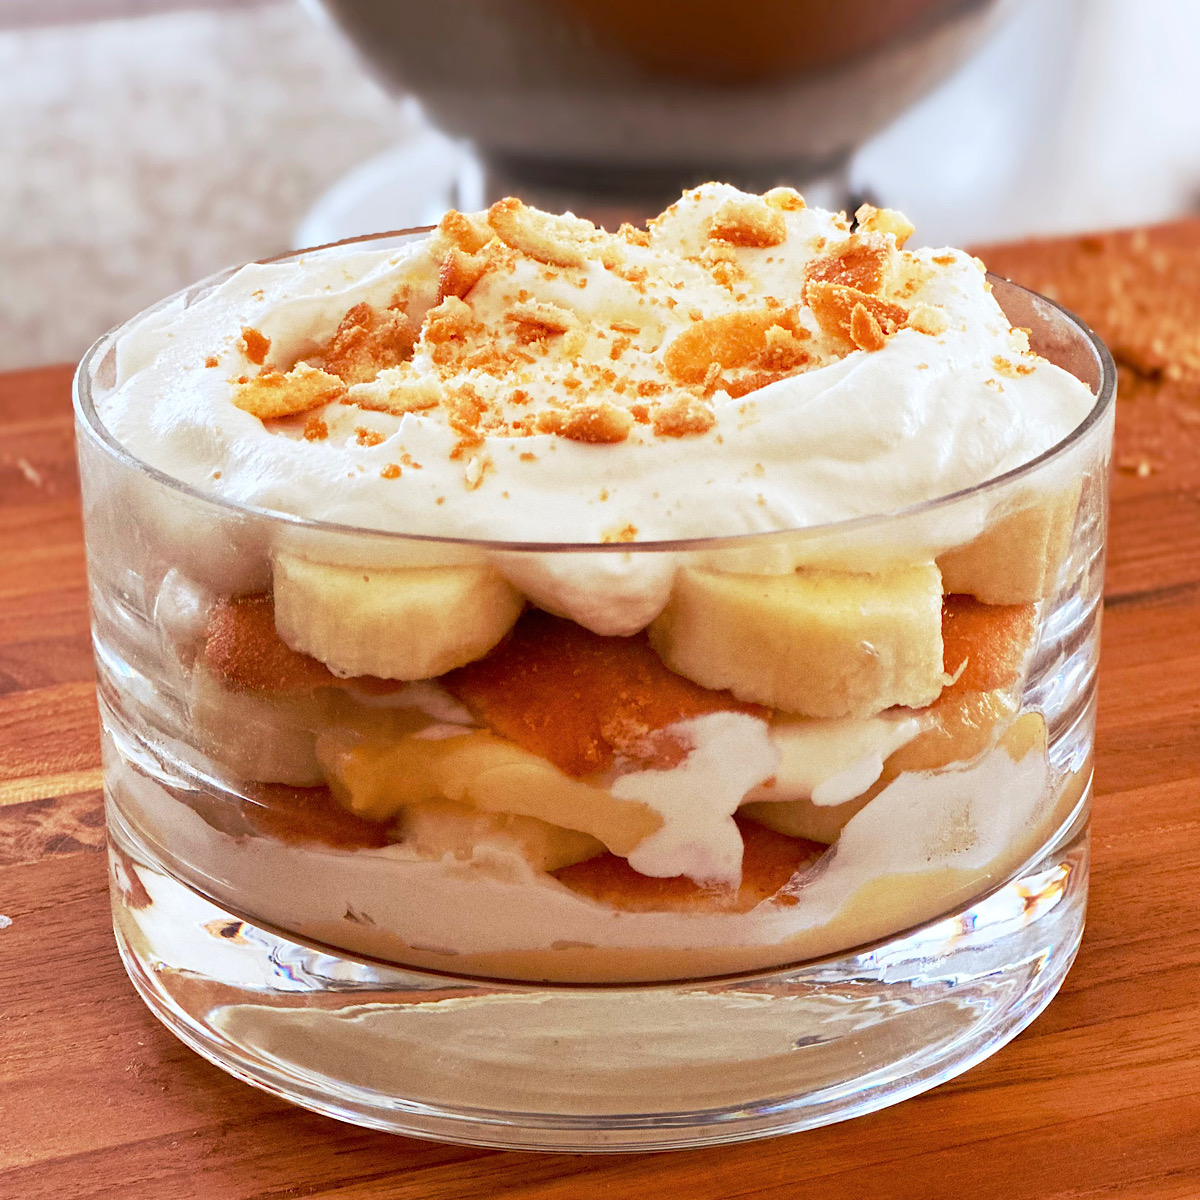 Banana Vanilla Wafer Pudding layered in glass bowl with whipped cream and wafer crumbs on top.